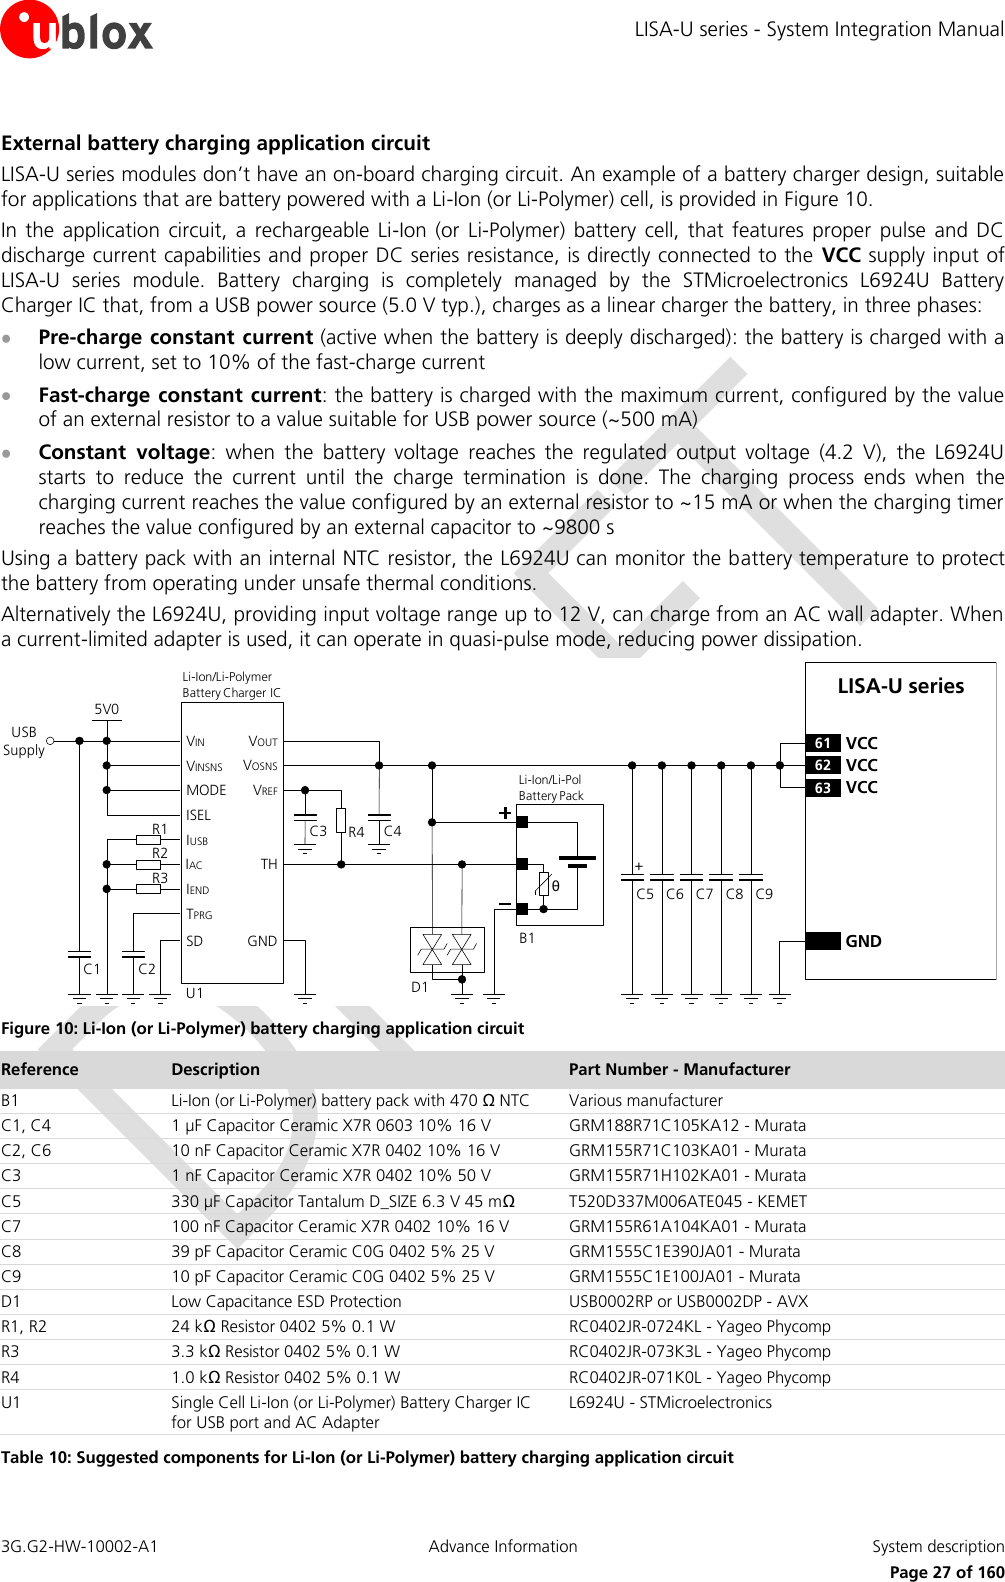 LISA-U series - System Integration Manual 3G.G2-HW-10002-A1  Advance Information  System description      Page 27 of 160 External battery charging application circuit LISA-U series modules don’t have an on-board charging circuit. An example of a battery charger design, suitable for applications that are battery powered with a Li-Ion (or Li-Polymer) cell, is provided in Figure 10. In the  application  circuit,  a  rechargeable  Li-Ion (or  Li-Polymer)  battery  cell,  that features  proper pulse  and  DC discharge current capabilities and proper DC series resistance, is directly connected to the  VCC supply input of LISA-U  series  module.  Battery  charging  is  completely  managed  by  the  STMicroelectronics  L6924U  Battery Charger IC that, from a USB power source (5.0 V typ.), charges as a linear charger the battery, in three phases:  Pre-charge constant current (active when the battery is deeply discharged): the battery is charged with a low current, set to 10% of the fast-charge current  Fast-charge constant  current: the battery is charged with the maximum current, configured by the value of an external resistor to a value suitable for USB power source (~500 mA)  Constant  voltage:  when  the  battery  voltage  reaches  the  regulated  output  voltage  (4.2  V),  the  L6924U starts  to  reduce  the  current  until  the  charge  termination  is  done.  The  charging  process  ends  when  the charging current reaches the value configured by an external resistor to ~15 mA or when the charging timer reaches the value configured by an external capacitor to ~9800 s Using a battery pack with an internal NTC resistor, the L6924U can monitor the battery temperature to protect the battery from operating under unsafe thermal conditions. Alternatively the L6924U, providing input voltage range up to 12 V, can charge from an AC wall adapter. When a current-limited adapter is used, it can operate in quasi-pulse mode, reducing power dissipation. C5 C8GNDC7C6 C9LISA-U series62 VCC63 VCC61 VCC+USB SupplyC3 R4θU1IUSBIACIENDTPRGSDVINVINSNSMODEISELC2C15V0THGNDVOUTVOSNSVREFR1R2R3Li-Ion/Li-Pol Battery PackD1B1C4Li-Ion/Li-Polymer    Battery Charger IC Figure 10: Li-Ion (or Li-Polymer) battery charging application circuit Reference Description Part Number - Manufacturer B1 Li-Ion (or Li-Polymer) battery pack with 470 Ω NTC Various manufacturer C1, C4 1 µF Capacitor Ceramic X7R 0603 10% 16 V GRM188R71C105KA12 - Murata C2, C6 10 nF Capacitor Ceramic X7R 0402 10% 16 V GRM155R71C103KA01 - Murata C3 1 nF Capacitor Ceramic X7R 0402 10% 50 V GRM155R71H102KA01 - Murata C5 330 µF Capacitor Tantalum D_SIZE 6.3 V 45 mΩ T520D337M006ATE045 - KEMET C7 100 nF Capacitor Ceramic X7R 0402 10% 16 V GRM155R61A104KA01 - Murata C8 39 pF Capacitor Ceramic C0G 0402 5% 25 V GRM1555C1E390JA01 - Murata C9 10 pF Capacitor Ceramic C0G 0402 5% 25 V GRM1555C1E100JA01 - Murata D1 Low Capacitance ESD Protection USB0002RP or USB0002DP - AVX R1, R2 24 kΩ Resistor 0402 5% 0.1 W RC0402JR-0724KL - Yageo Phycomp R3 3.3 kΩ Resistor 0402 5% 0.1 W RC0402JR-073K3L - Yageo Phycomp R4 1.0 kΩ Resistor 0402 5% 0.1 W RC0402JR-071K0L - Yageo Phycomp U1 Single Cell Li-Ion (or Li-Polymer) Battery Charger IC for USB port and AC Adapter L6924U - STMicroelectronics Table 10: Suggested components for Li-Ion (or Li-Polymer) battery charging application circuit  